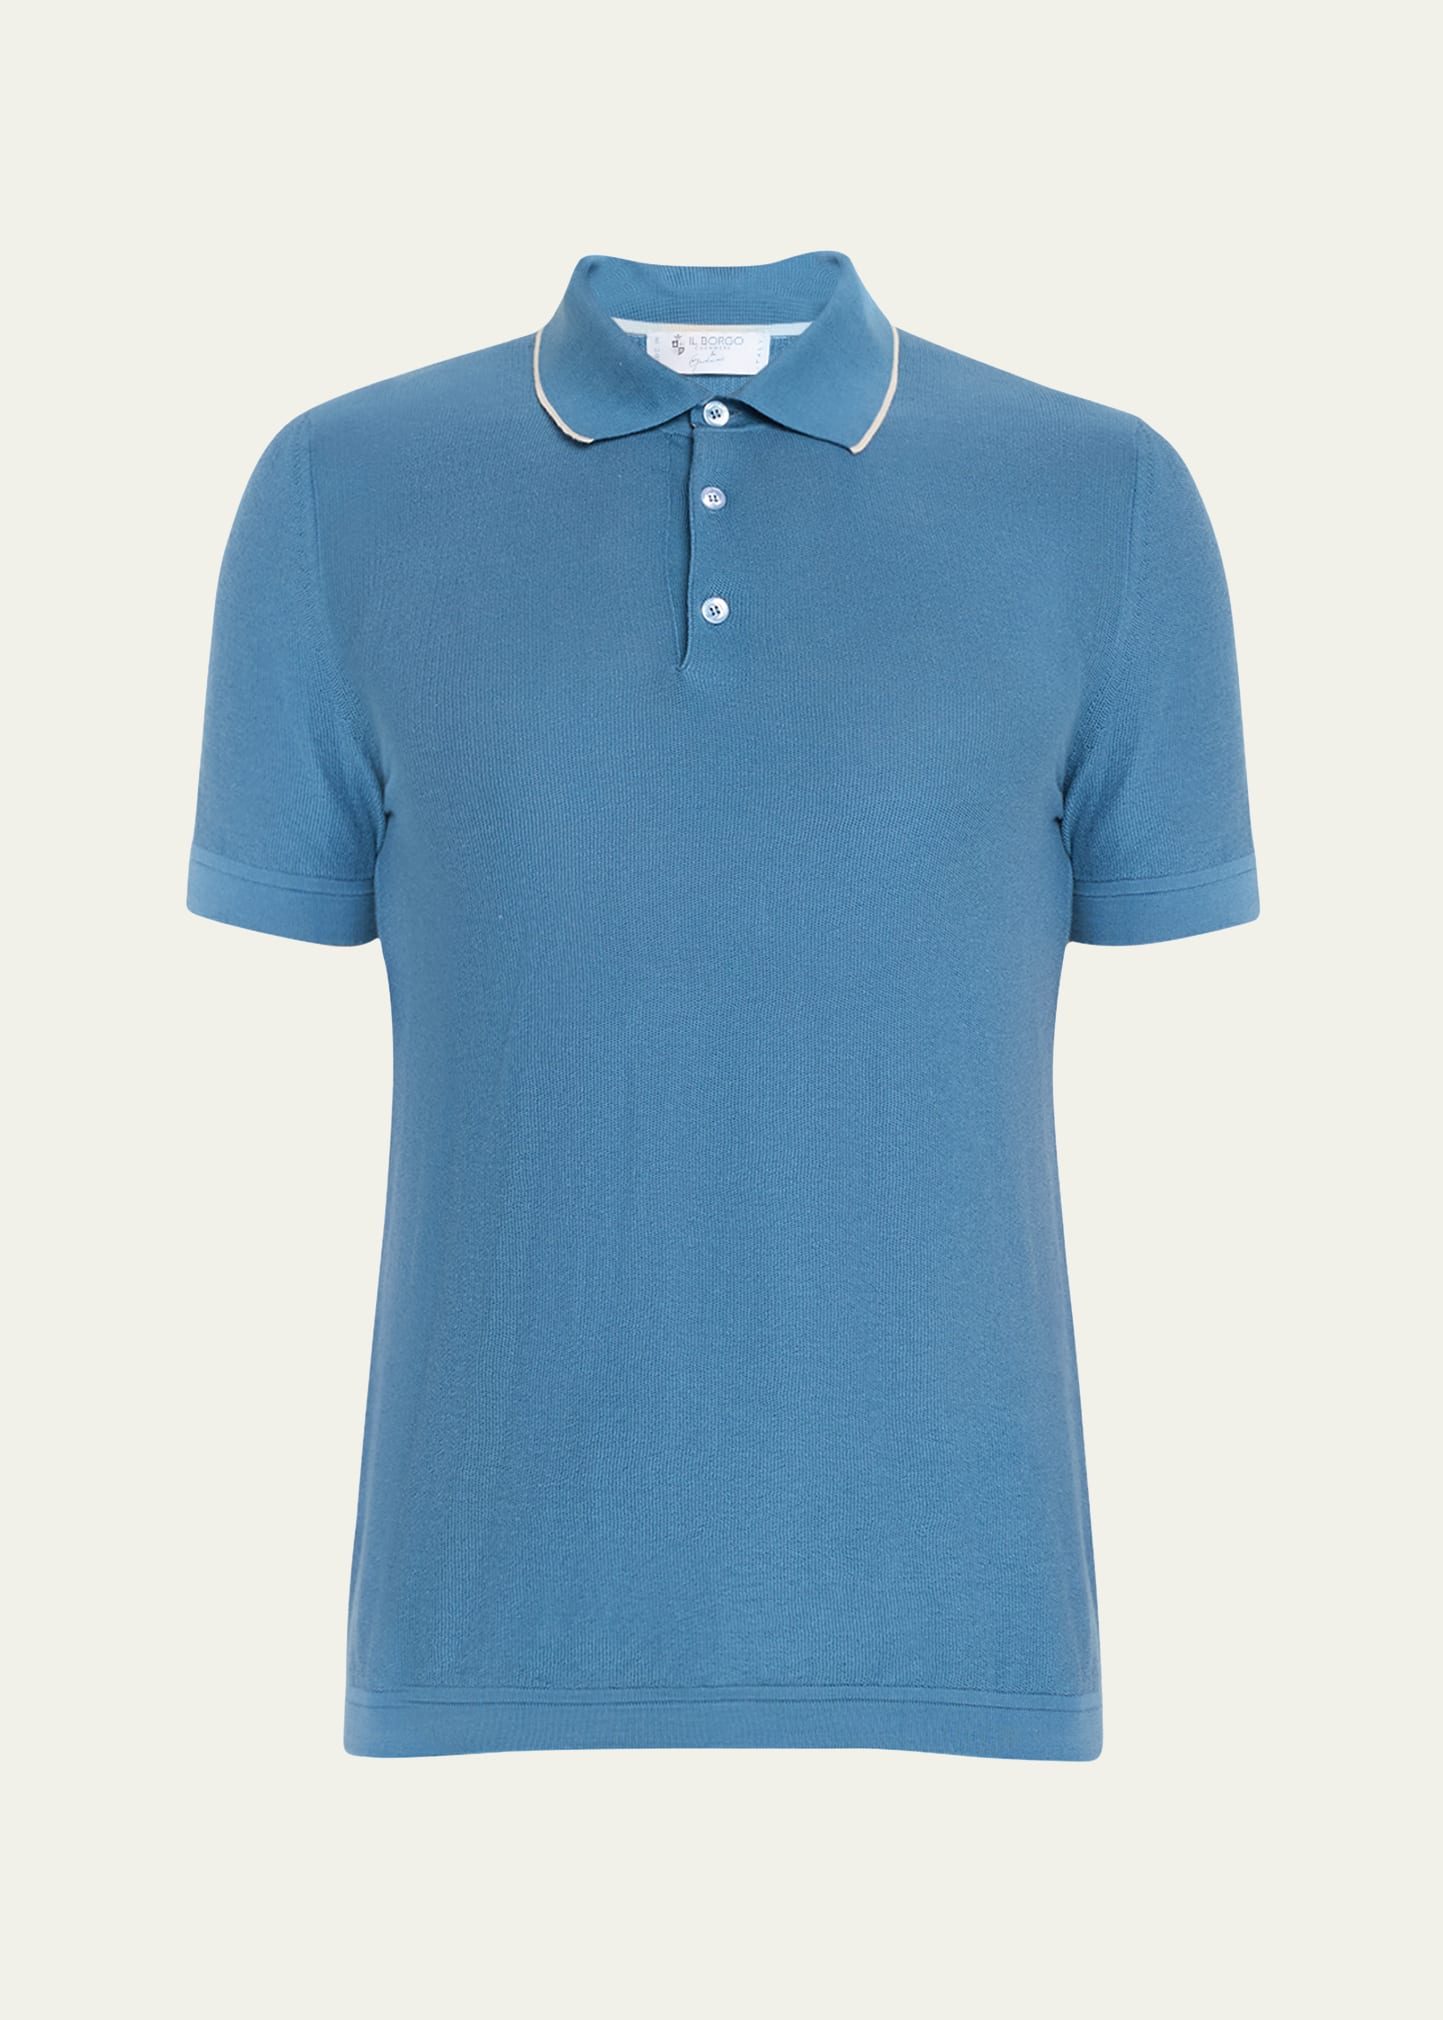 Il Borgo Men's Cotton Pique Polo Sweater With Tipping In Light Blue Nl0130